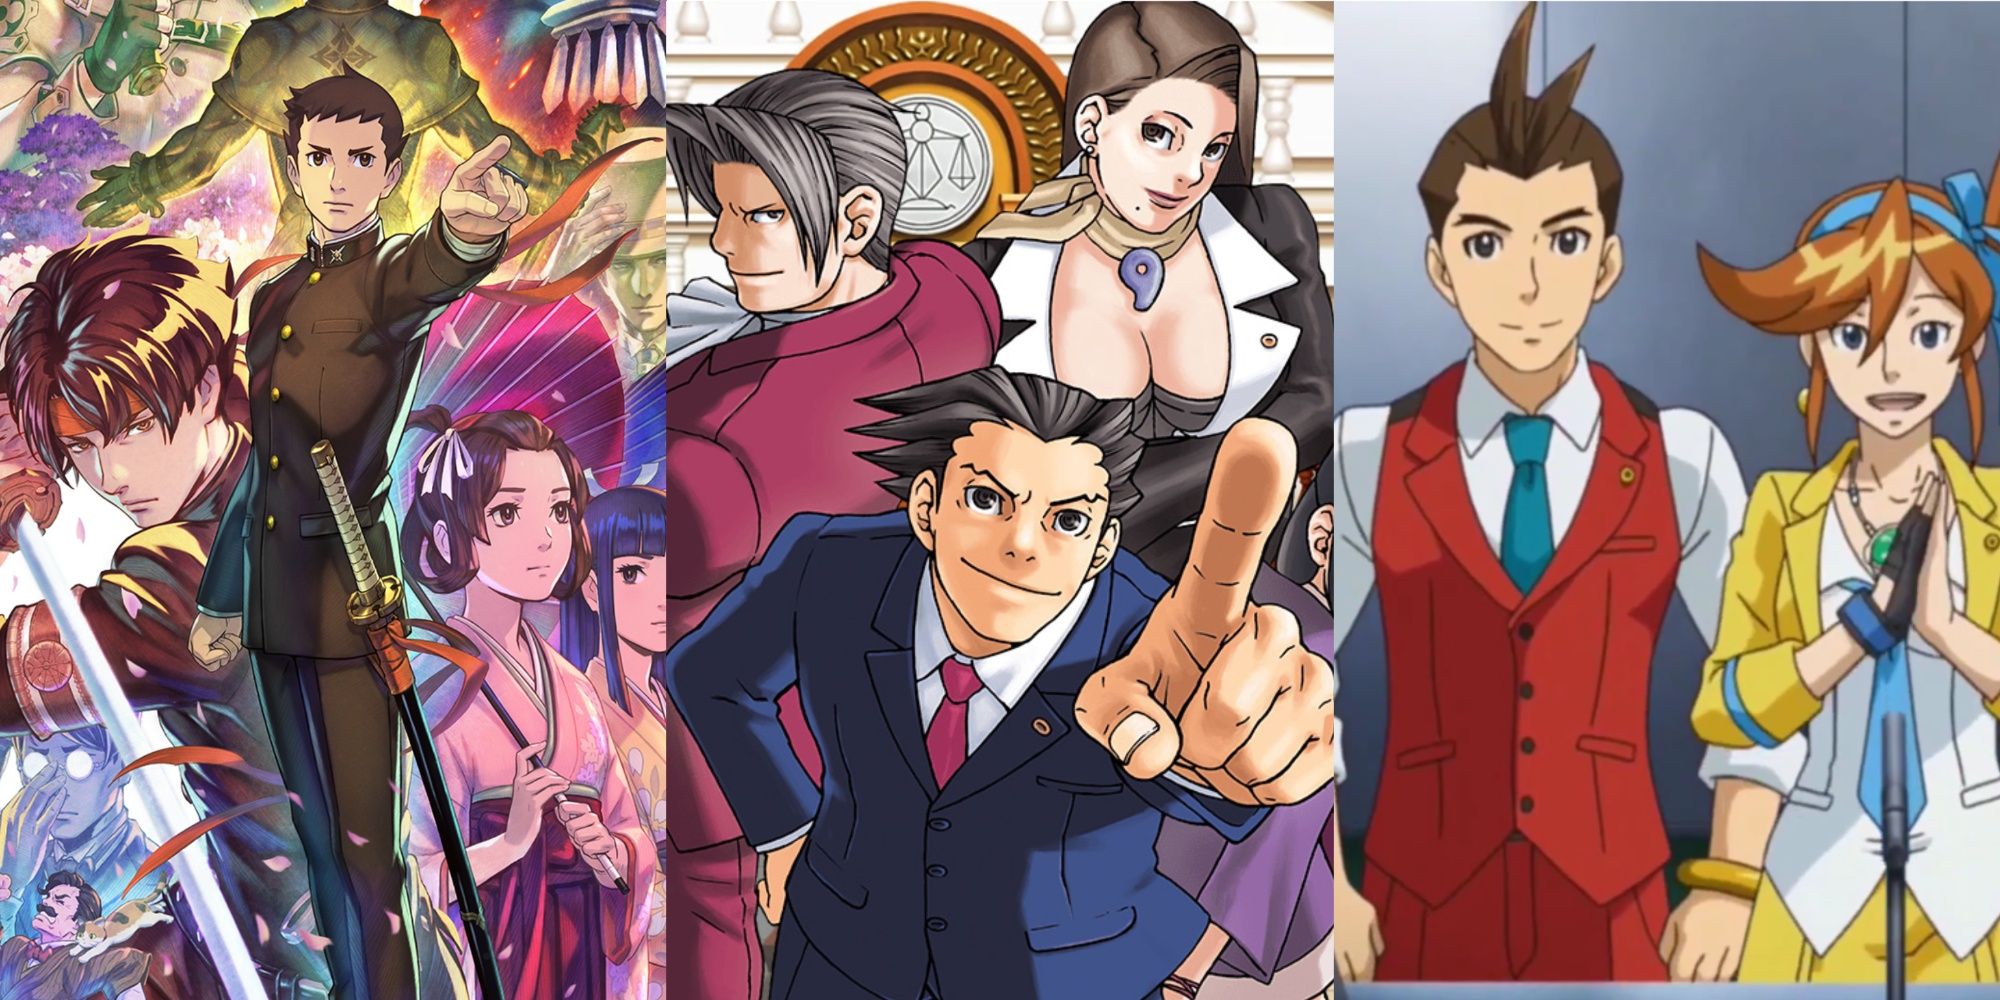 A collage showing characters art for three different Ace Attorney games.